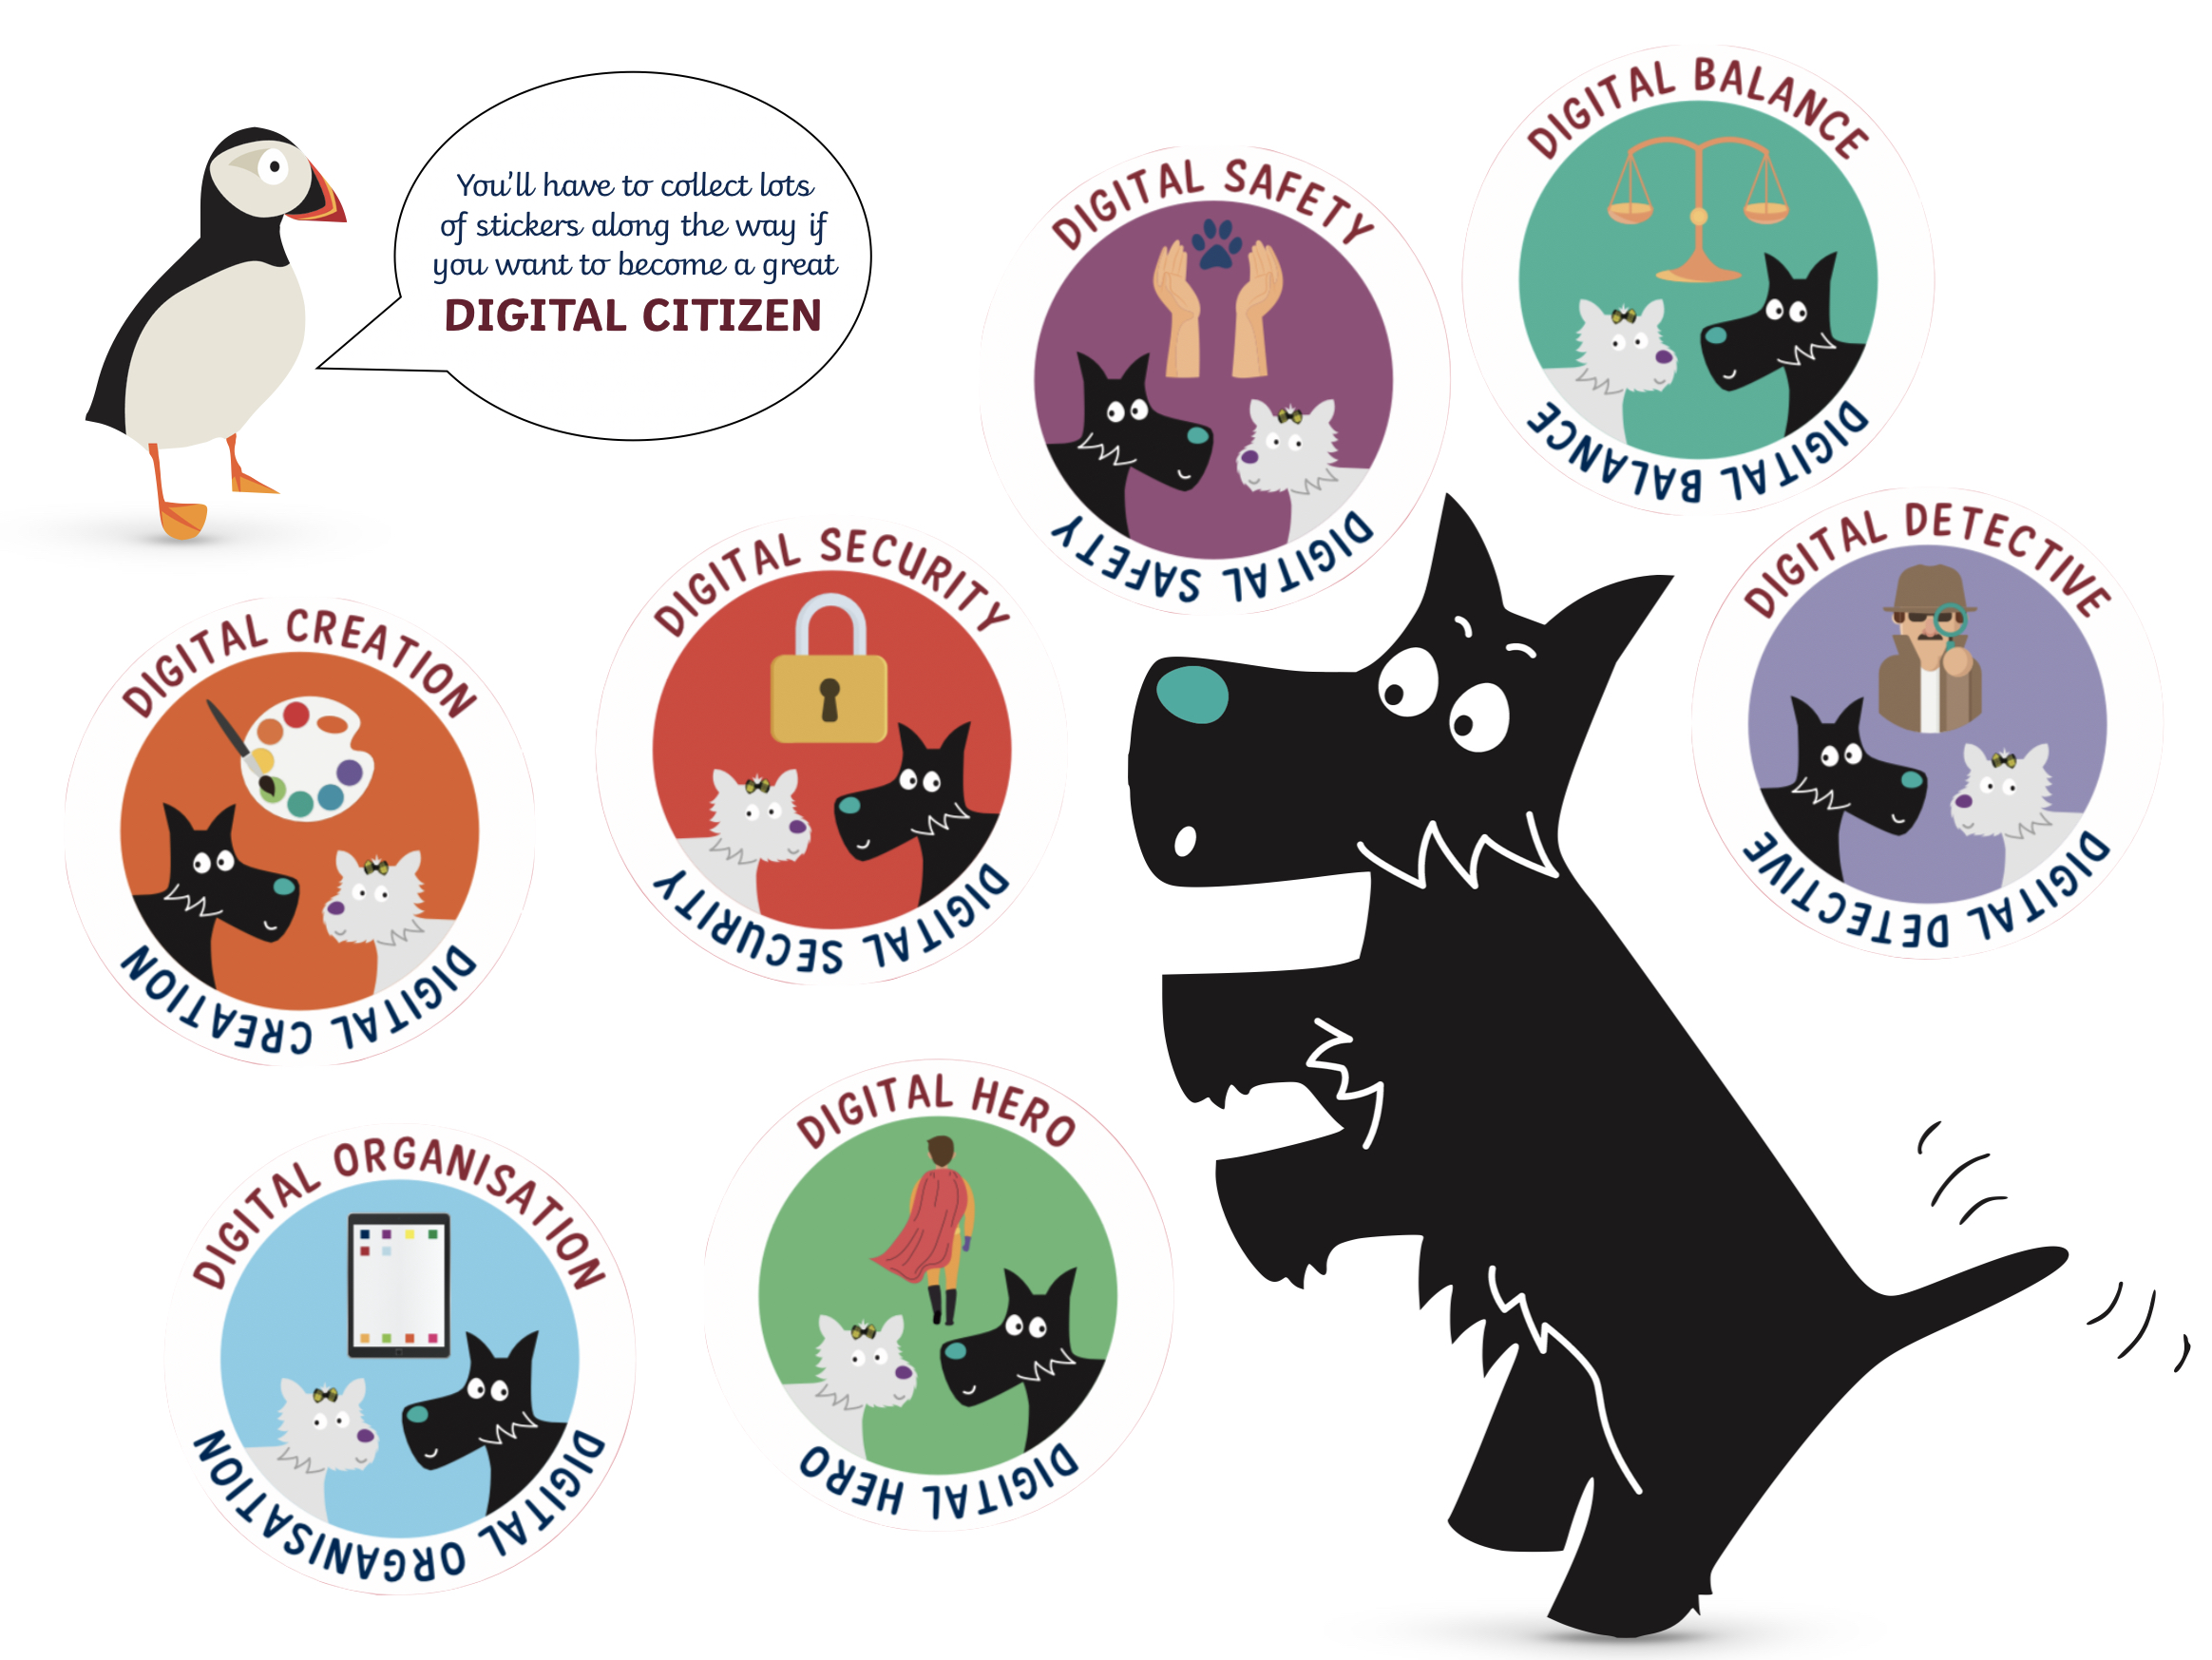 Fergus the black Scottish Highland Terrier cartoon with each of the digital badges that students can earn.